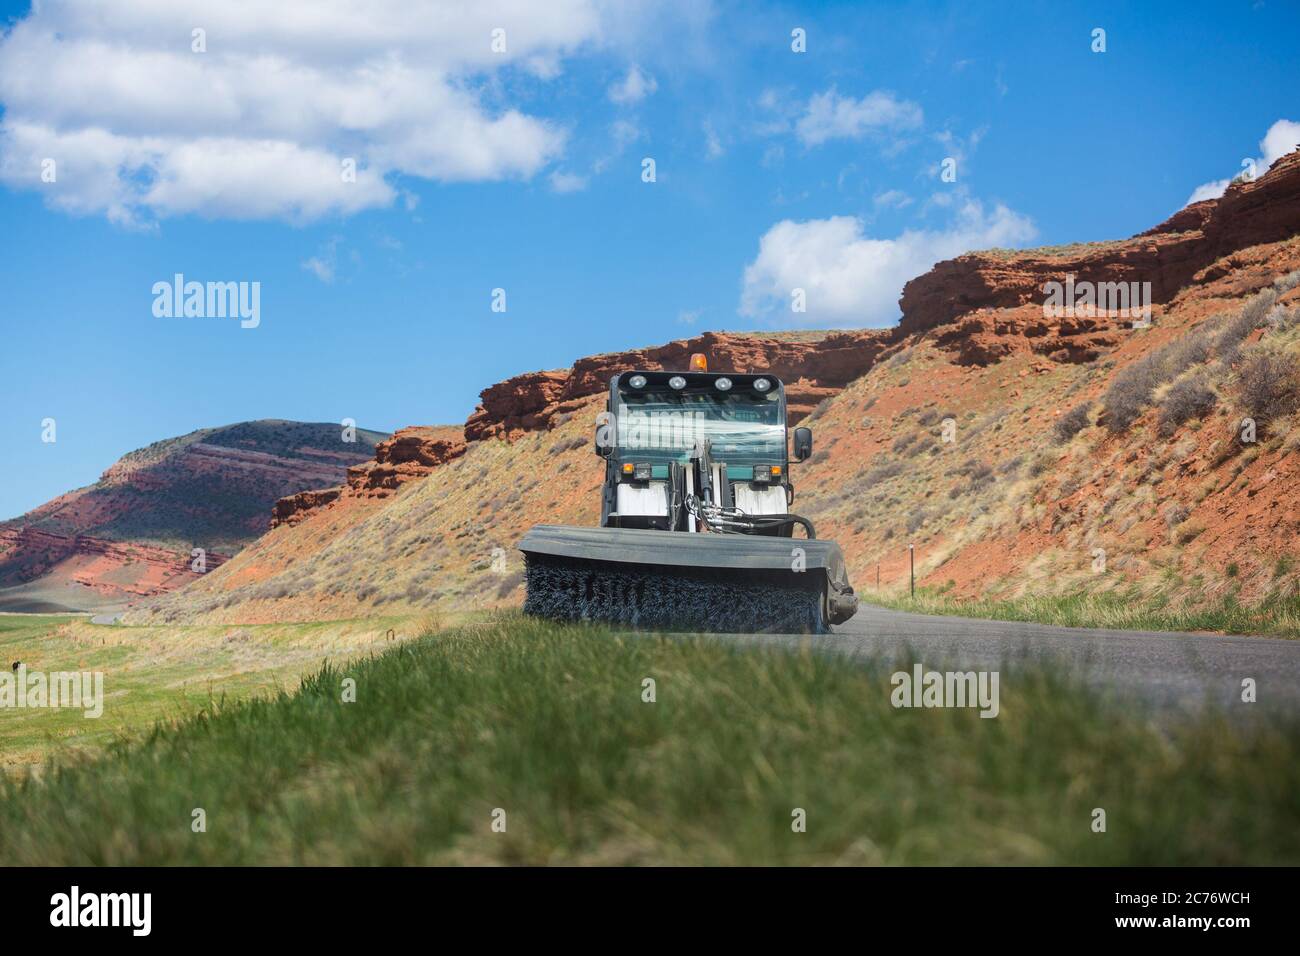 Street sweeper cleaning road in desert landscape, Wyoming, USA Stock Photo